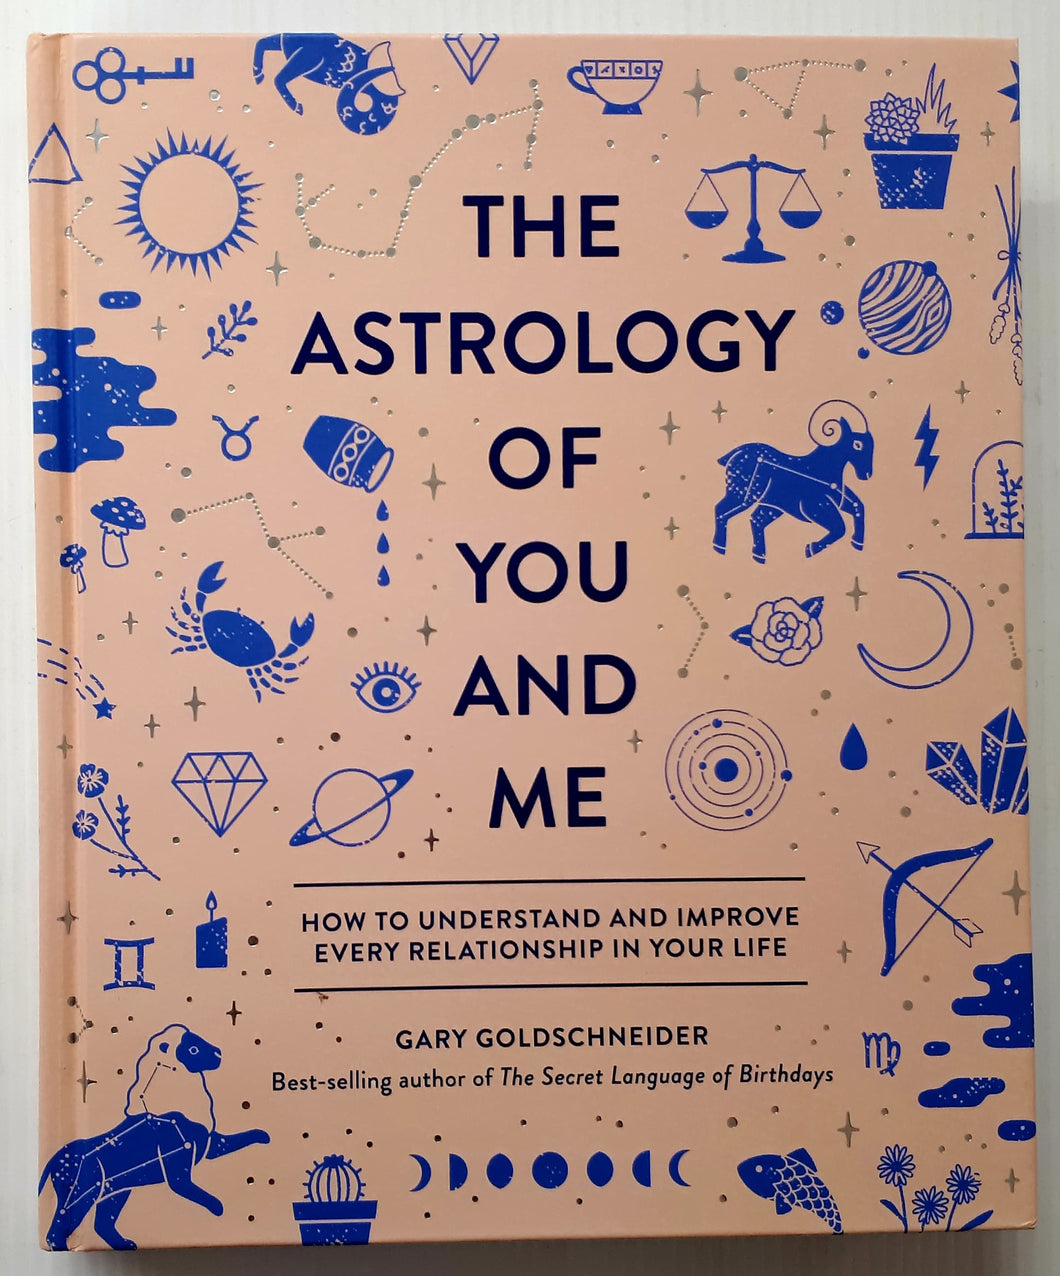 THE ASTROLOGY OF YOU AND ME - Gary Goldschneider